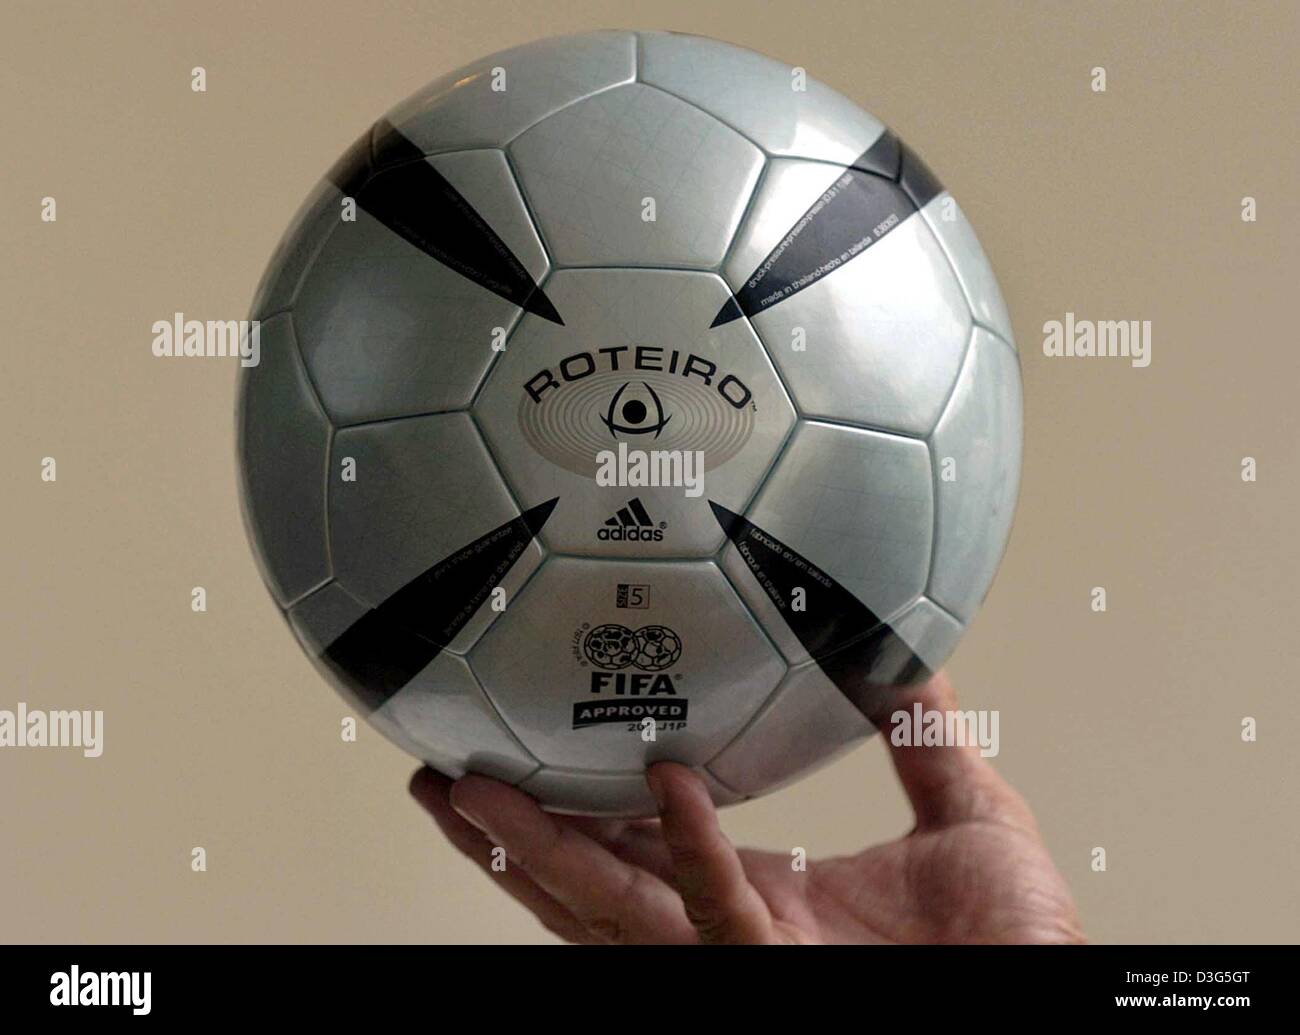 dpa) - The official ball for the Euro 2004 soccer championships, called ' Roteiro', is presented in Almancil, near Faro, Portugal, 28 November 2003.  The draw for the championship group games was held